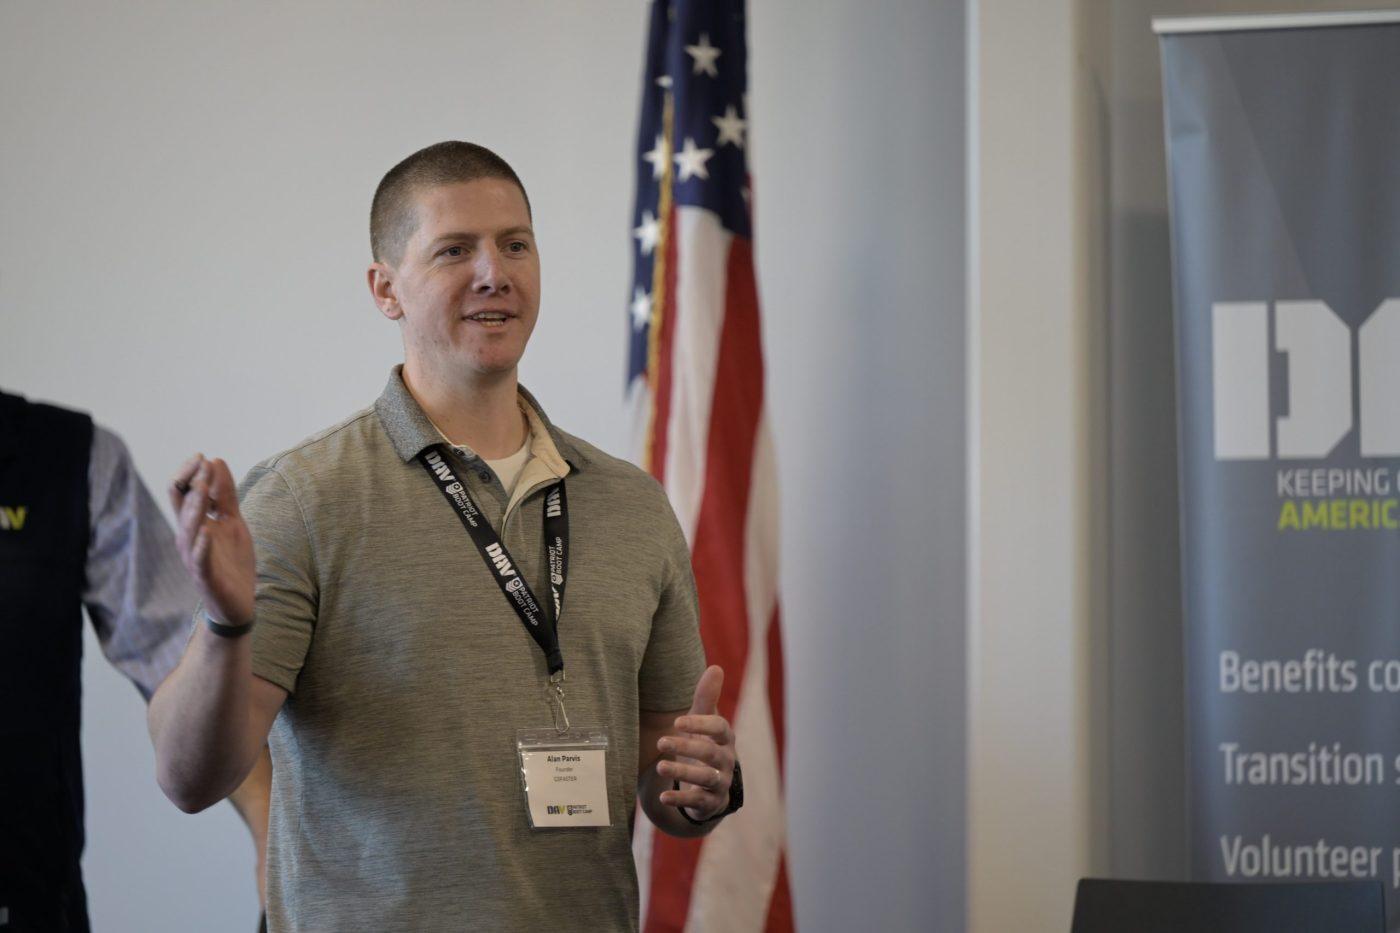 Vetrepreneur has ‘empowering’ experience at DAV Patriot Boot Camp. Learn how you can, too.